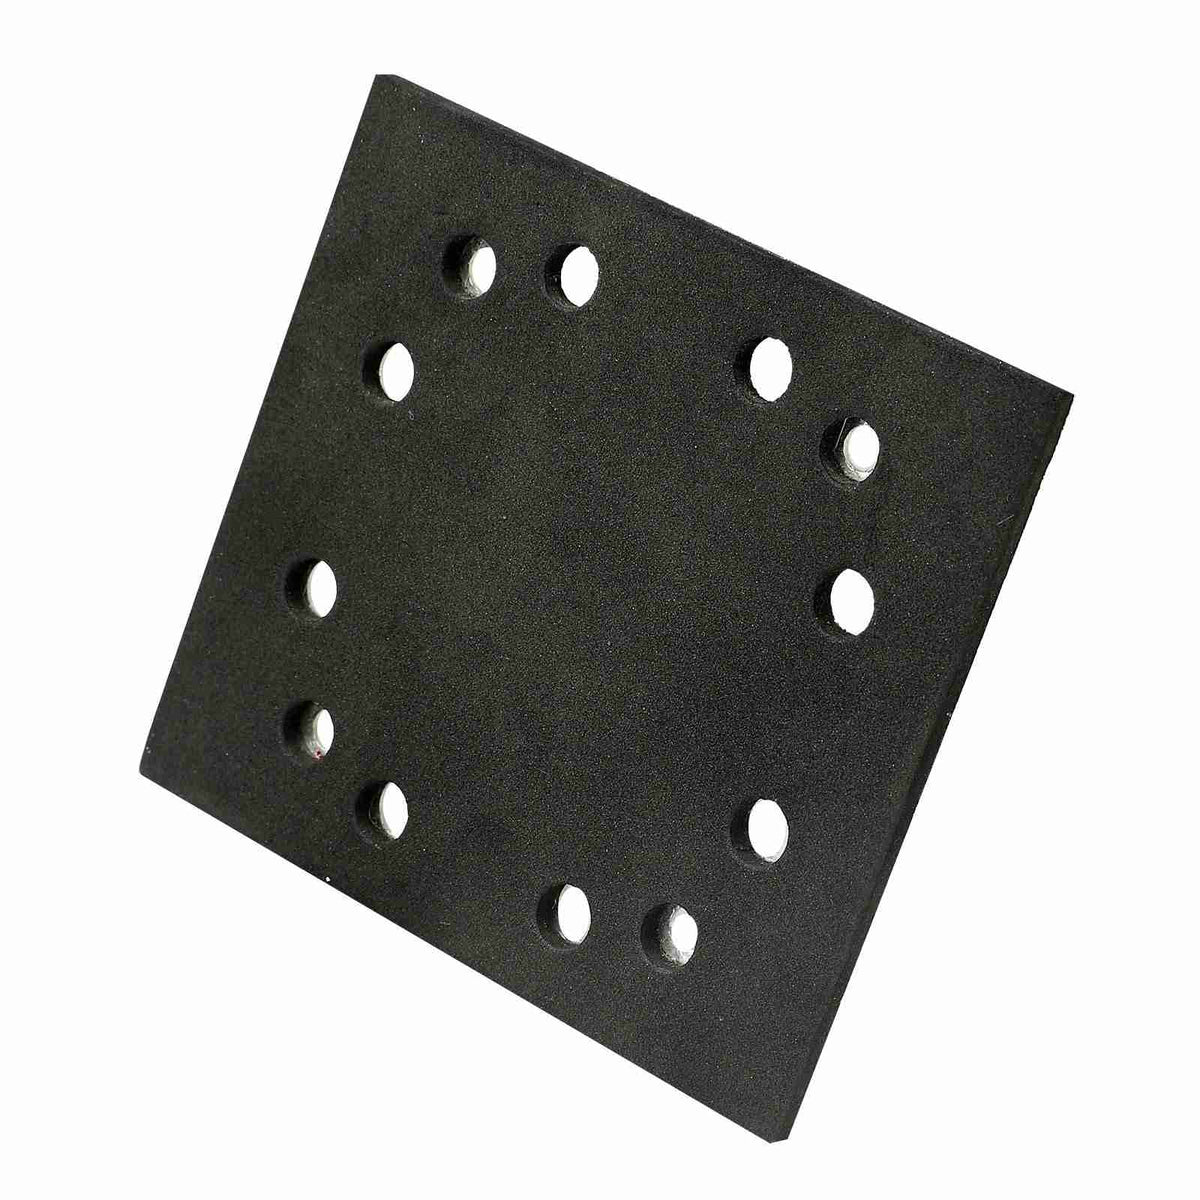 1/4 Sheet Sander Pad hole for 340 J-340 Rep Porter Cable 13592 – 